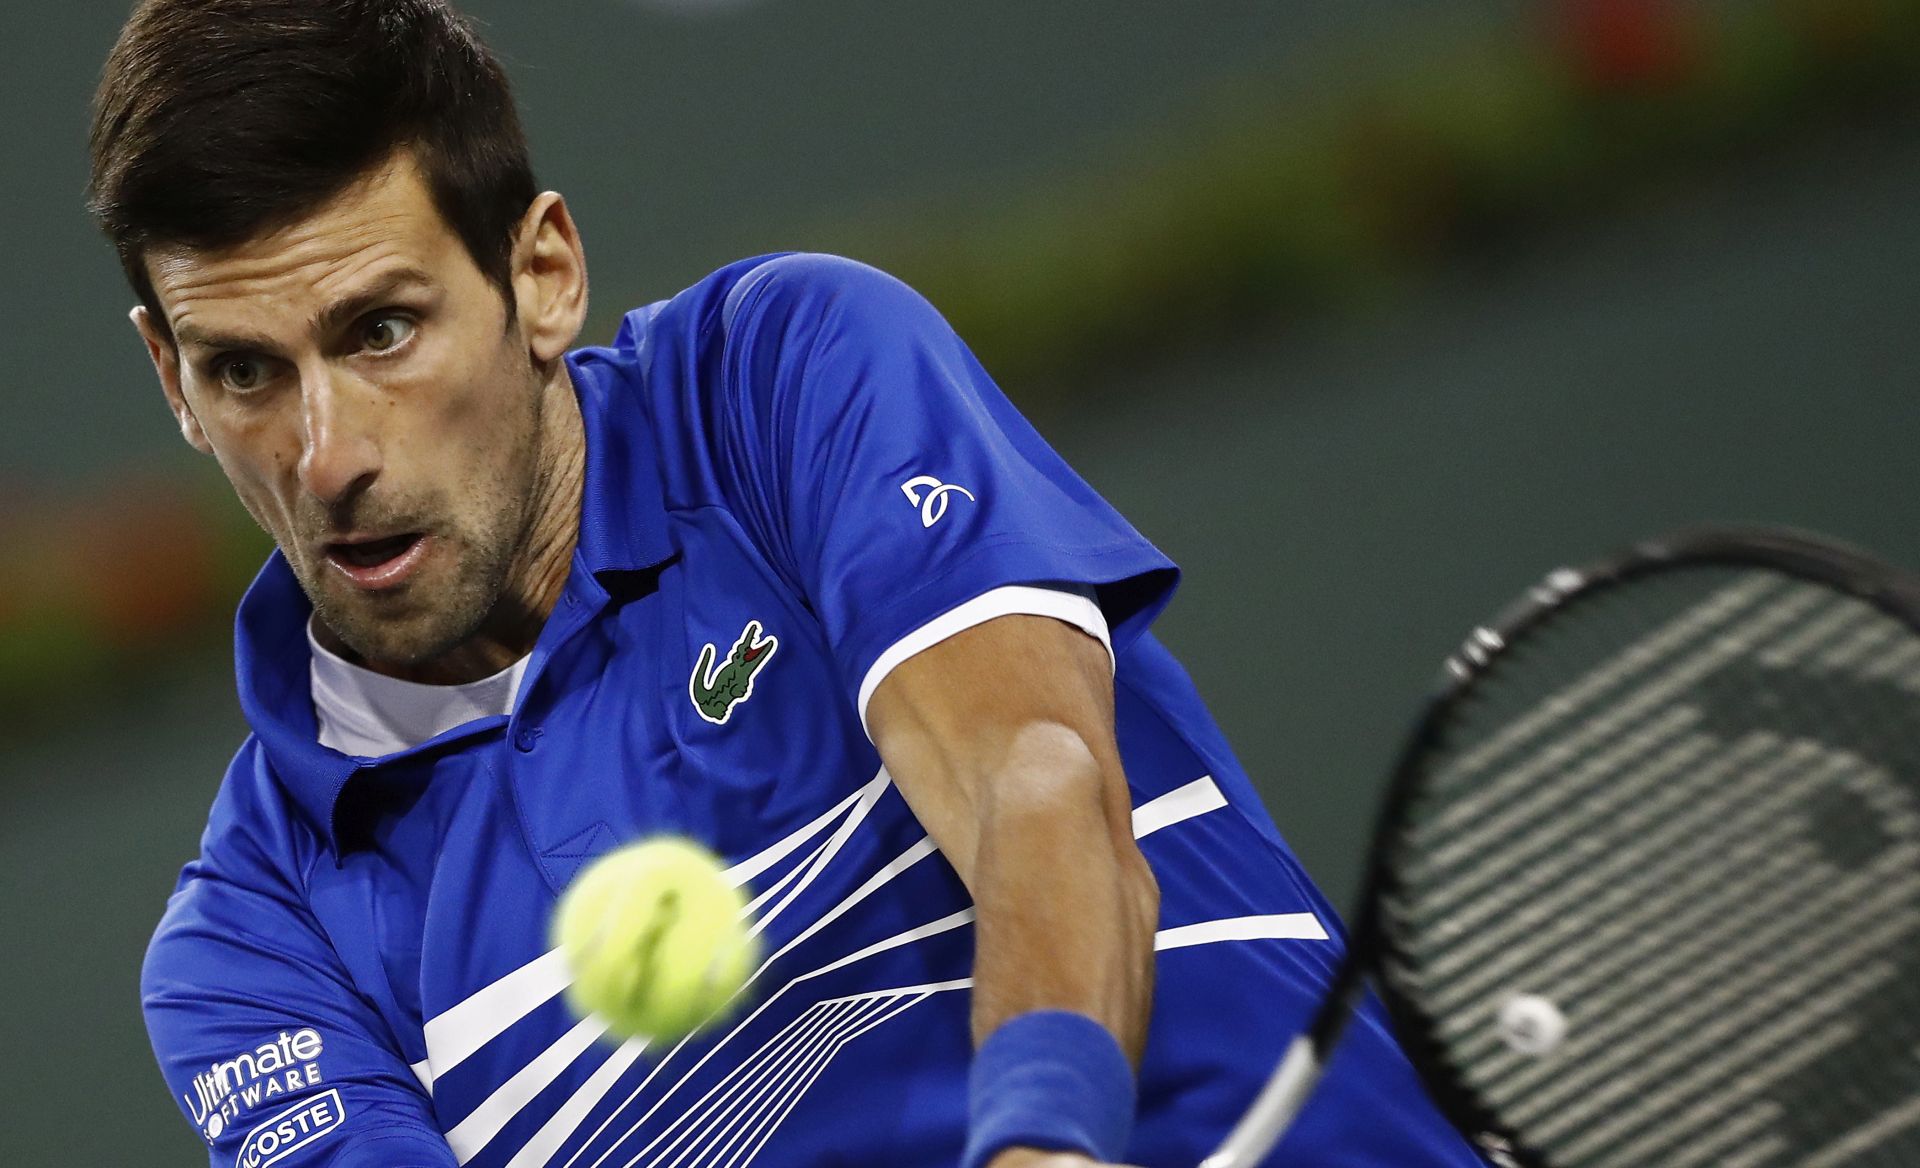 epa07430159 Novak Djokovic of Serbia in action against Philipp Kohlschreiber of Germany during the BNP Paribas Open tennis tournament at the Indian Wells Tennis Garden in Indian Wells, California, USA, 11 March 2019. The men's and women's final will be played, 17 March 2019.  EPA/LARRY W. SMITH